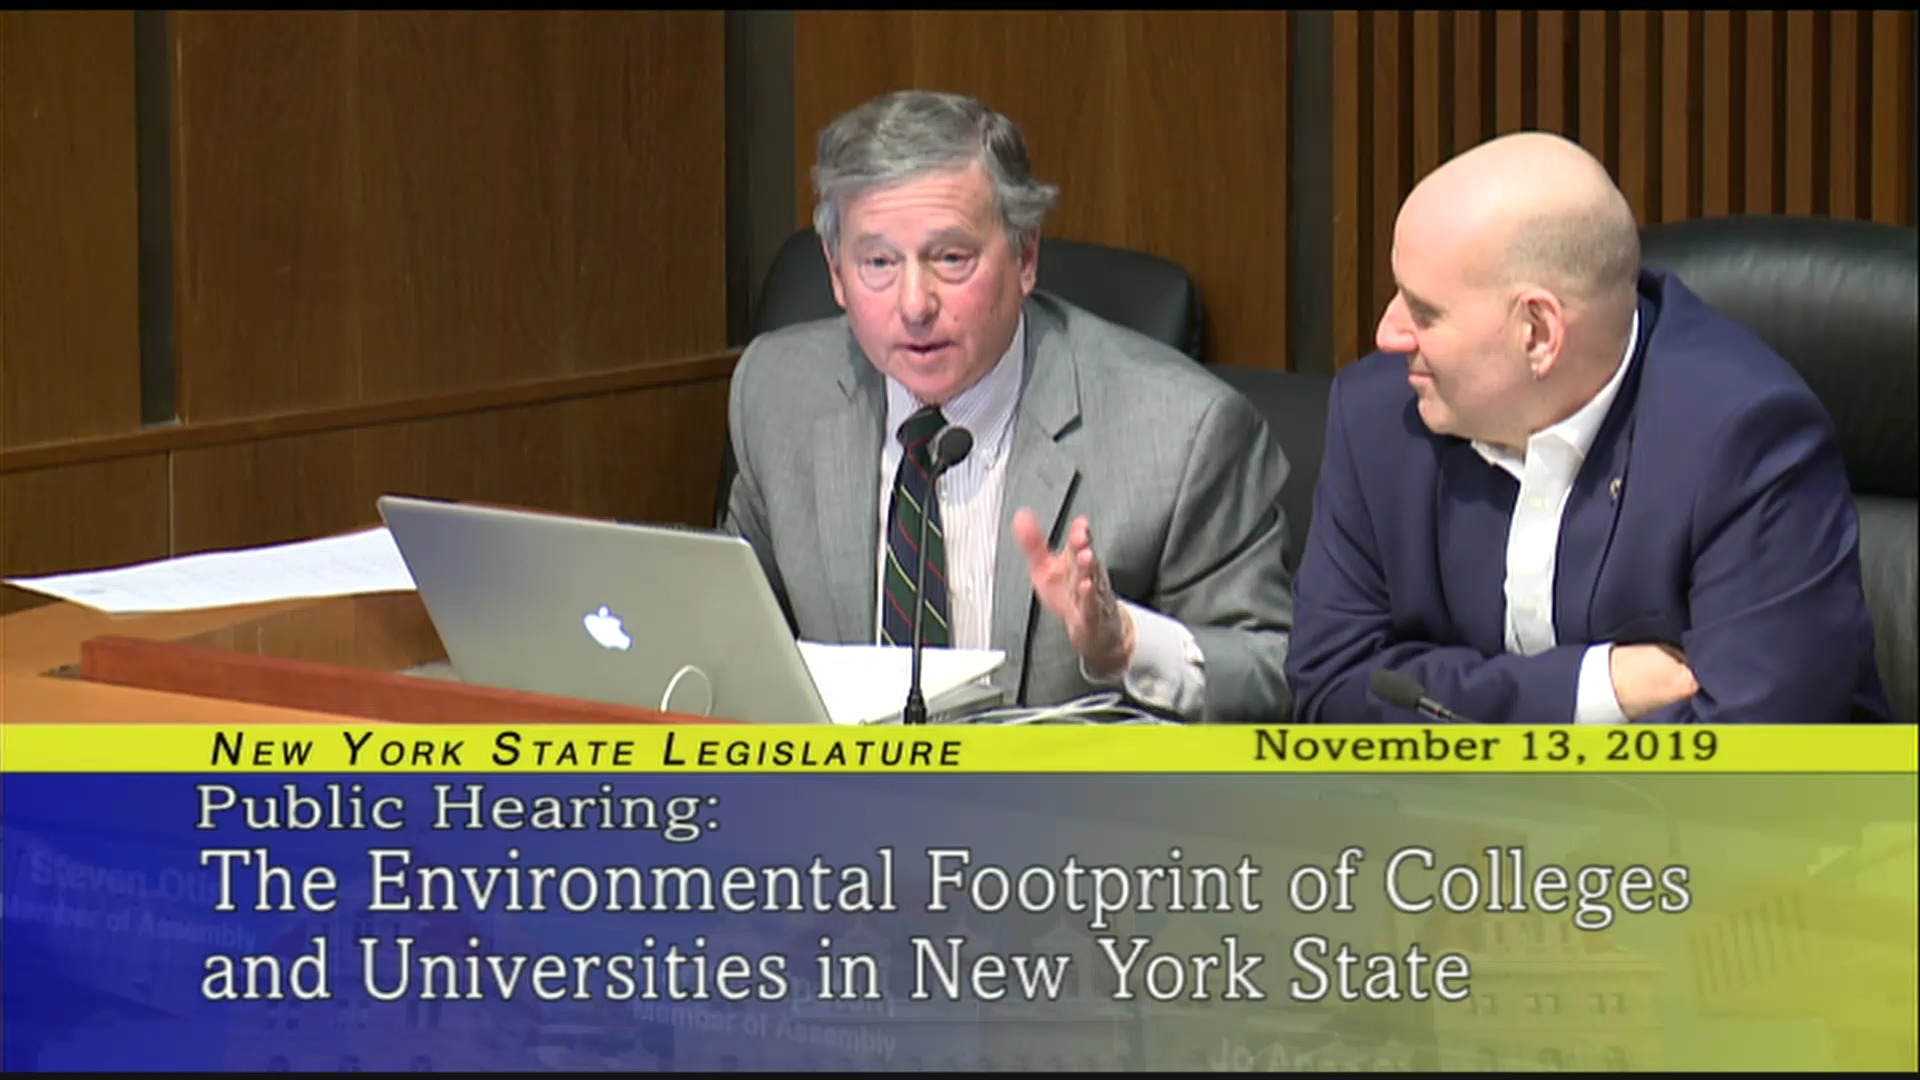 Discussion on the Environmental Footprint of Colleges and Universities in NY